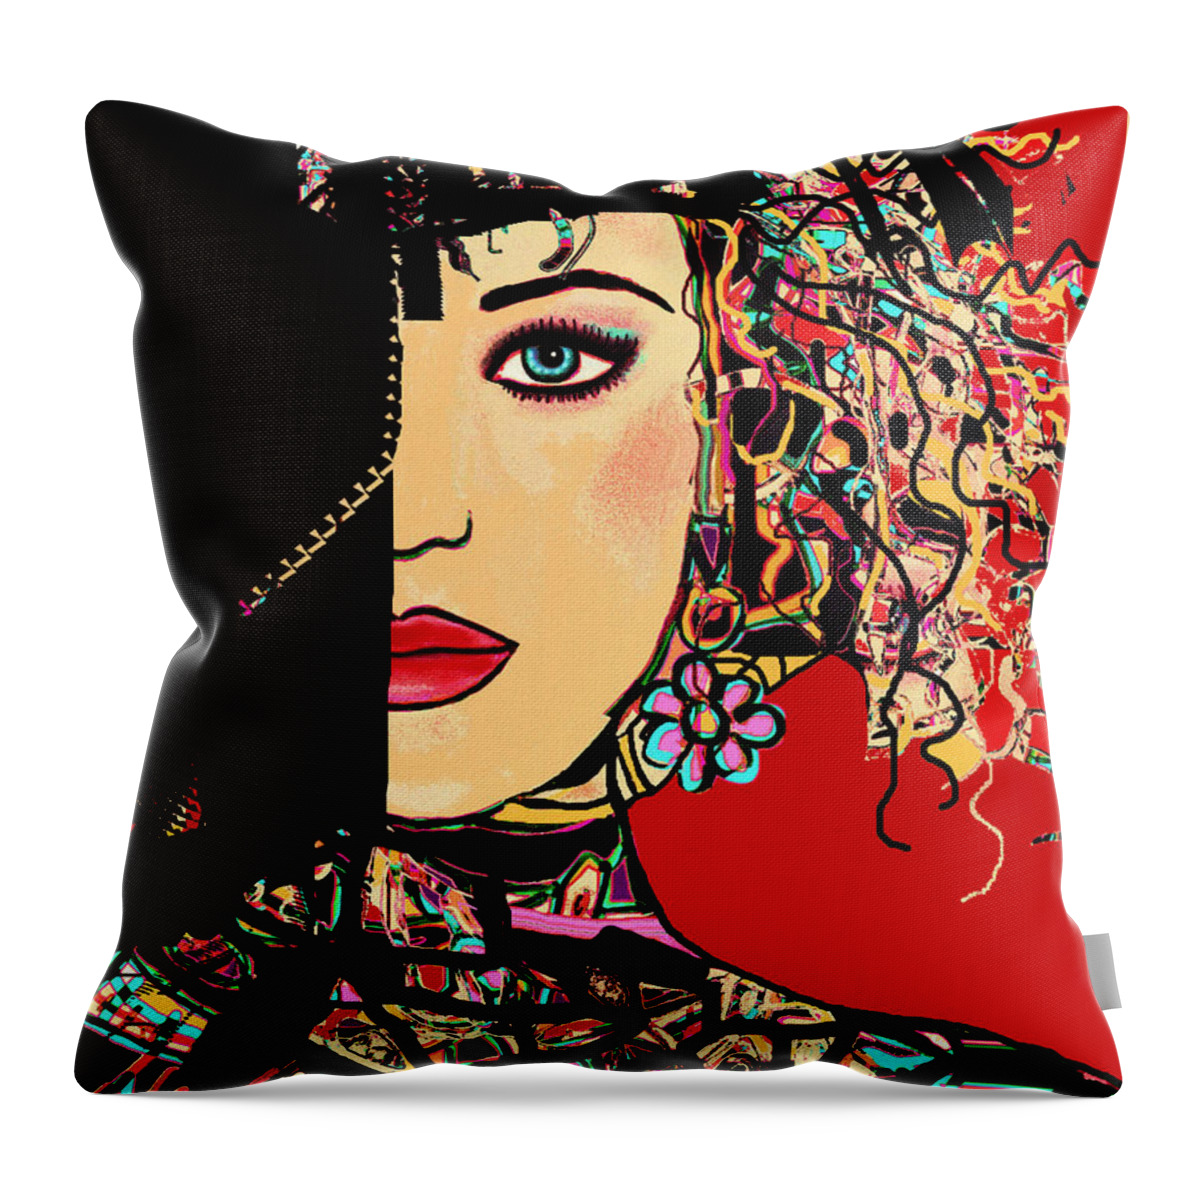 Woman Throw Pillow featuring the mixed media Mysterious Gaze by Natalie Holland